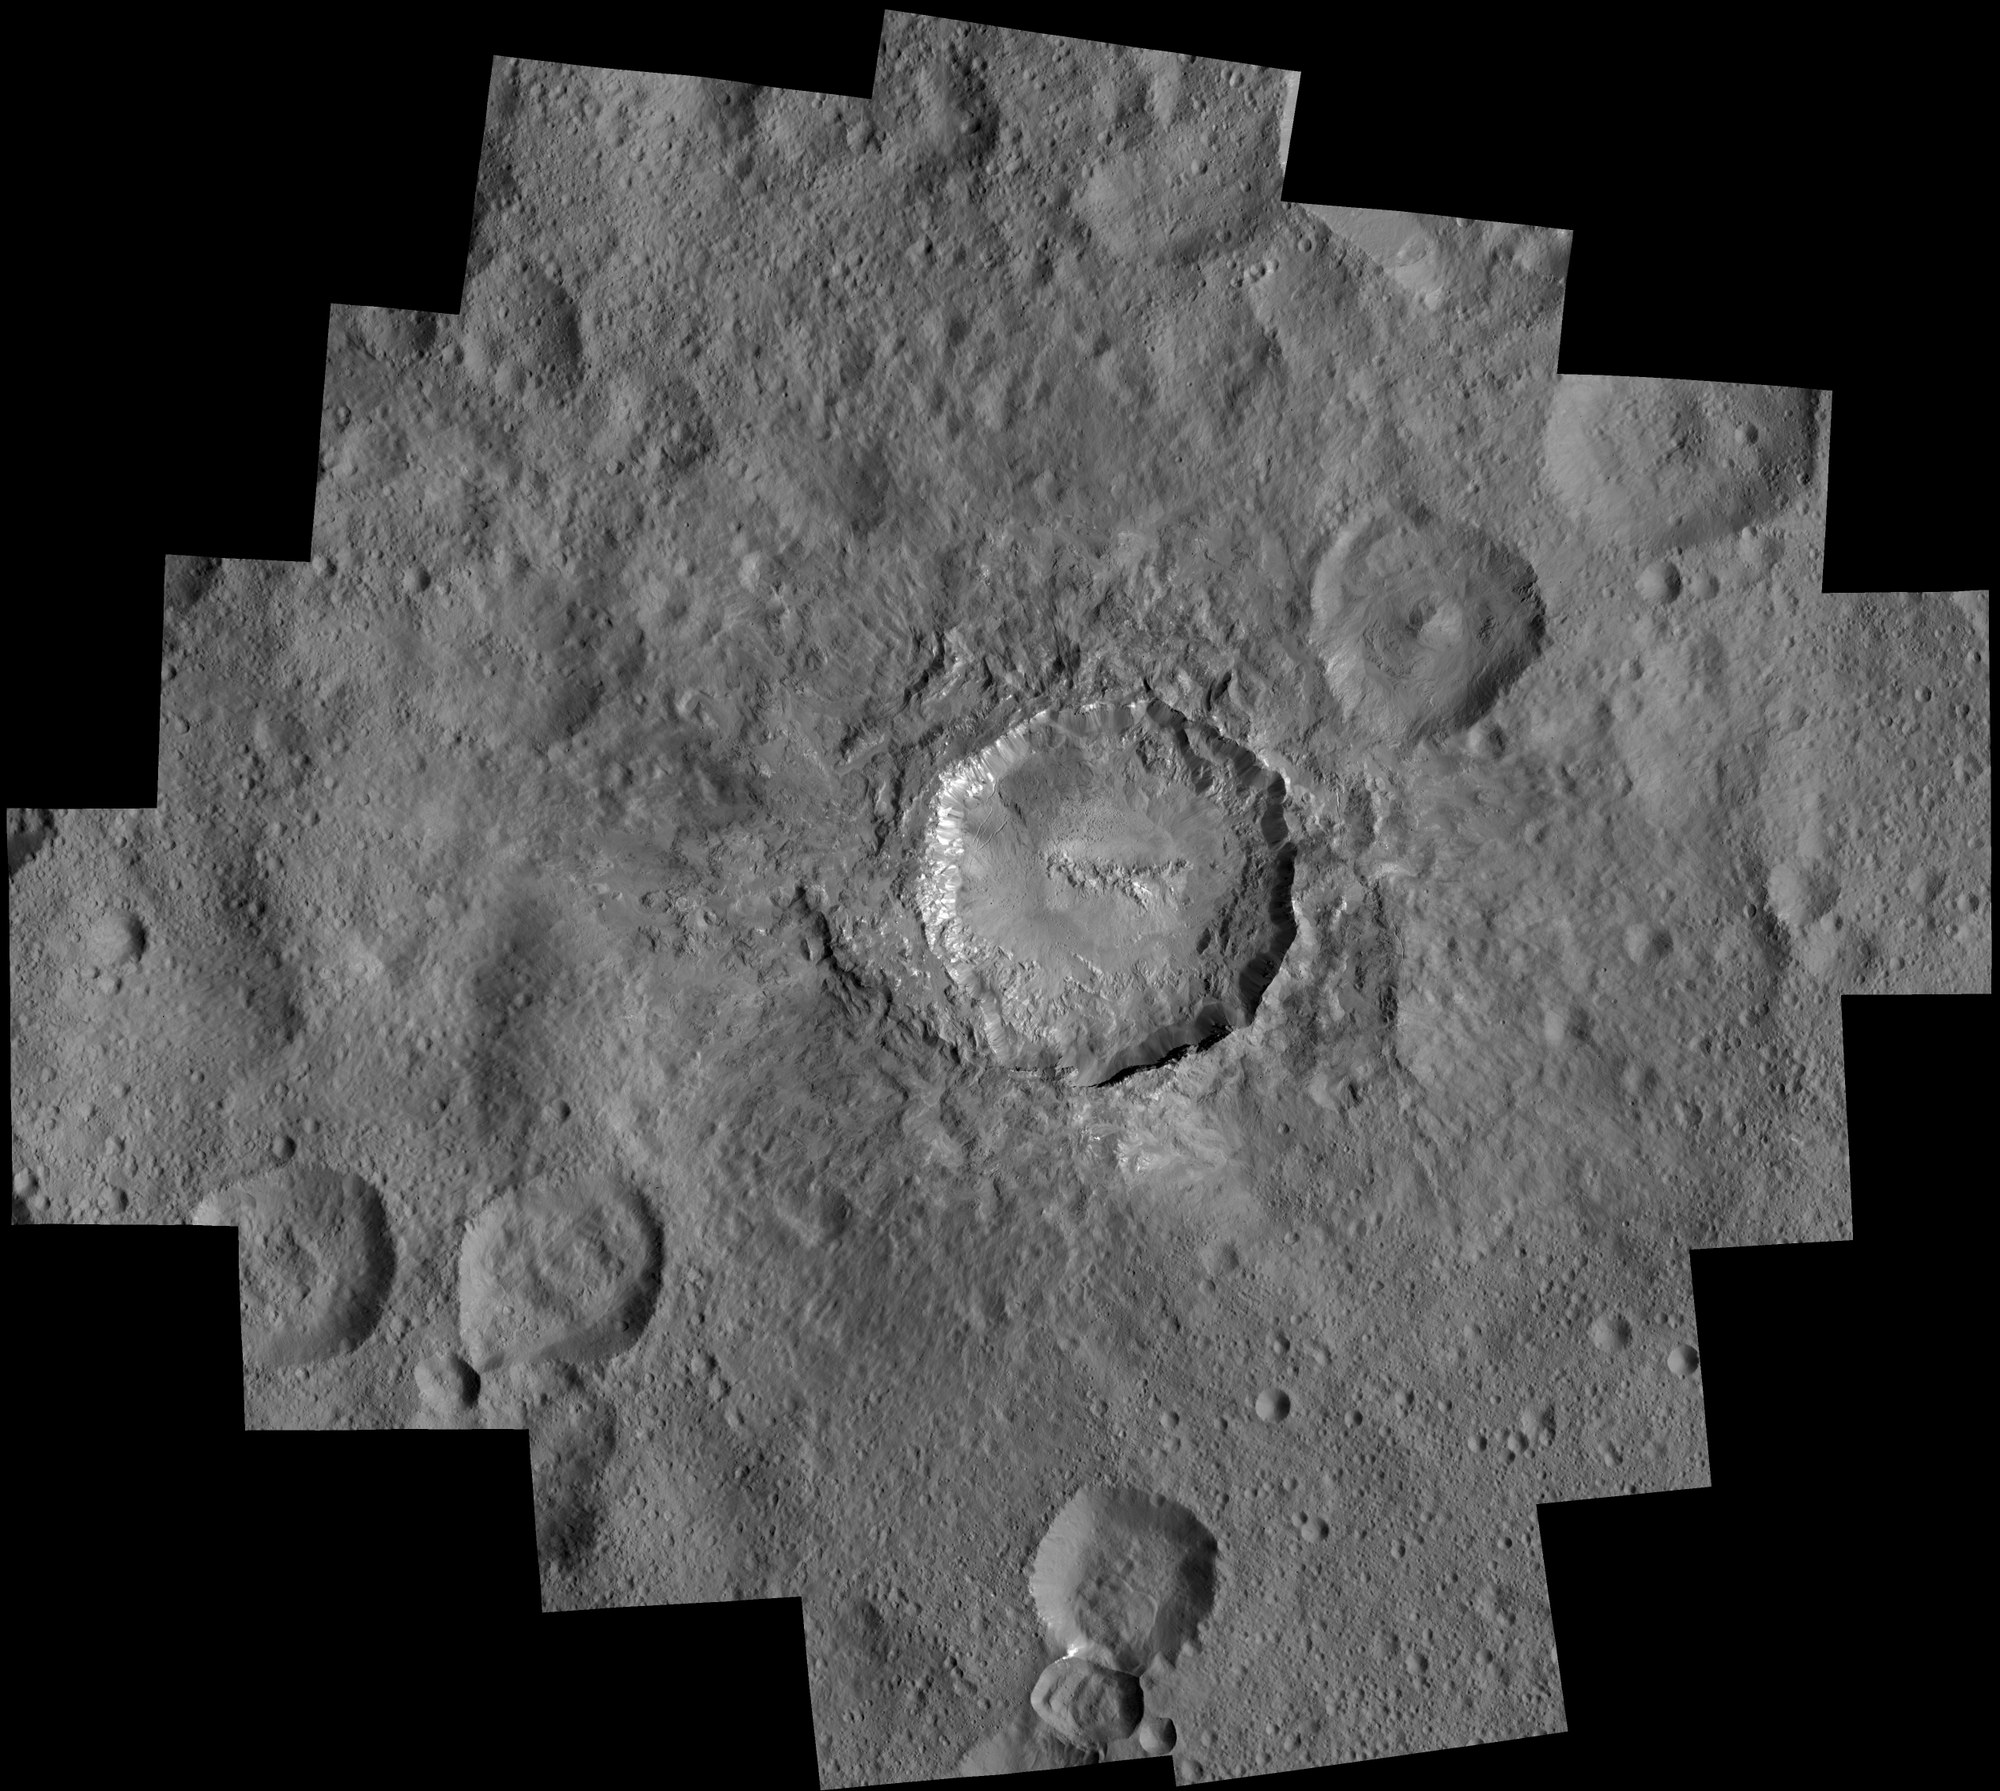 The Haulani crater on Ceres